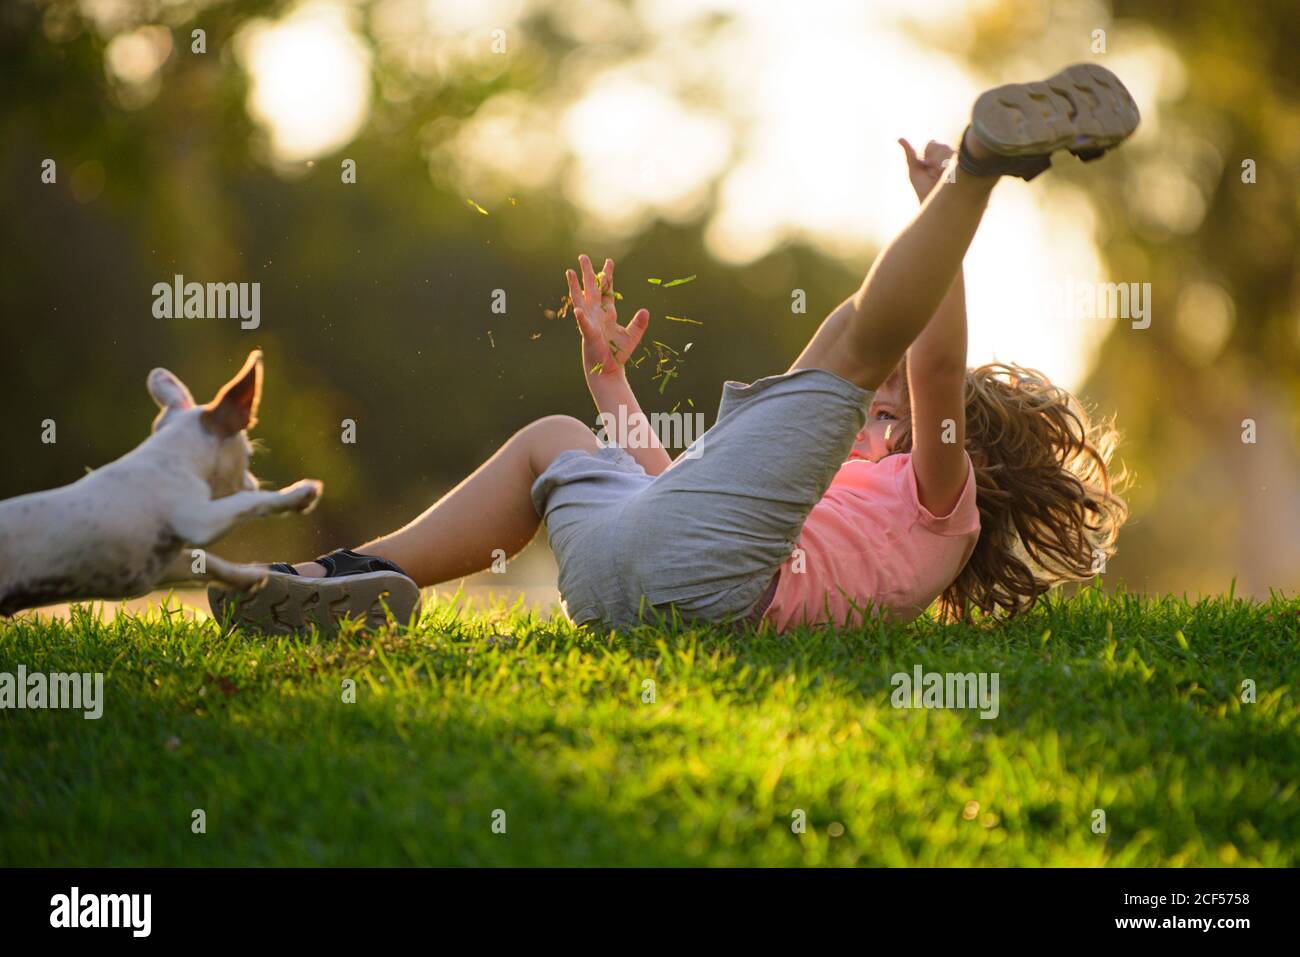 Cute child playing with a puppy dog, outdoor summer. Kid with pets. Stock Photo